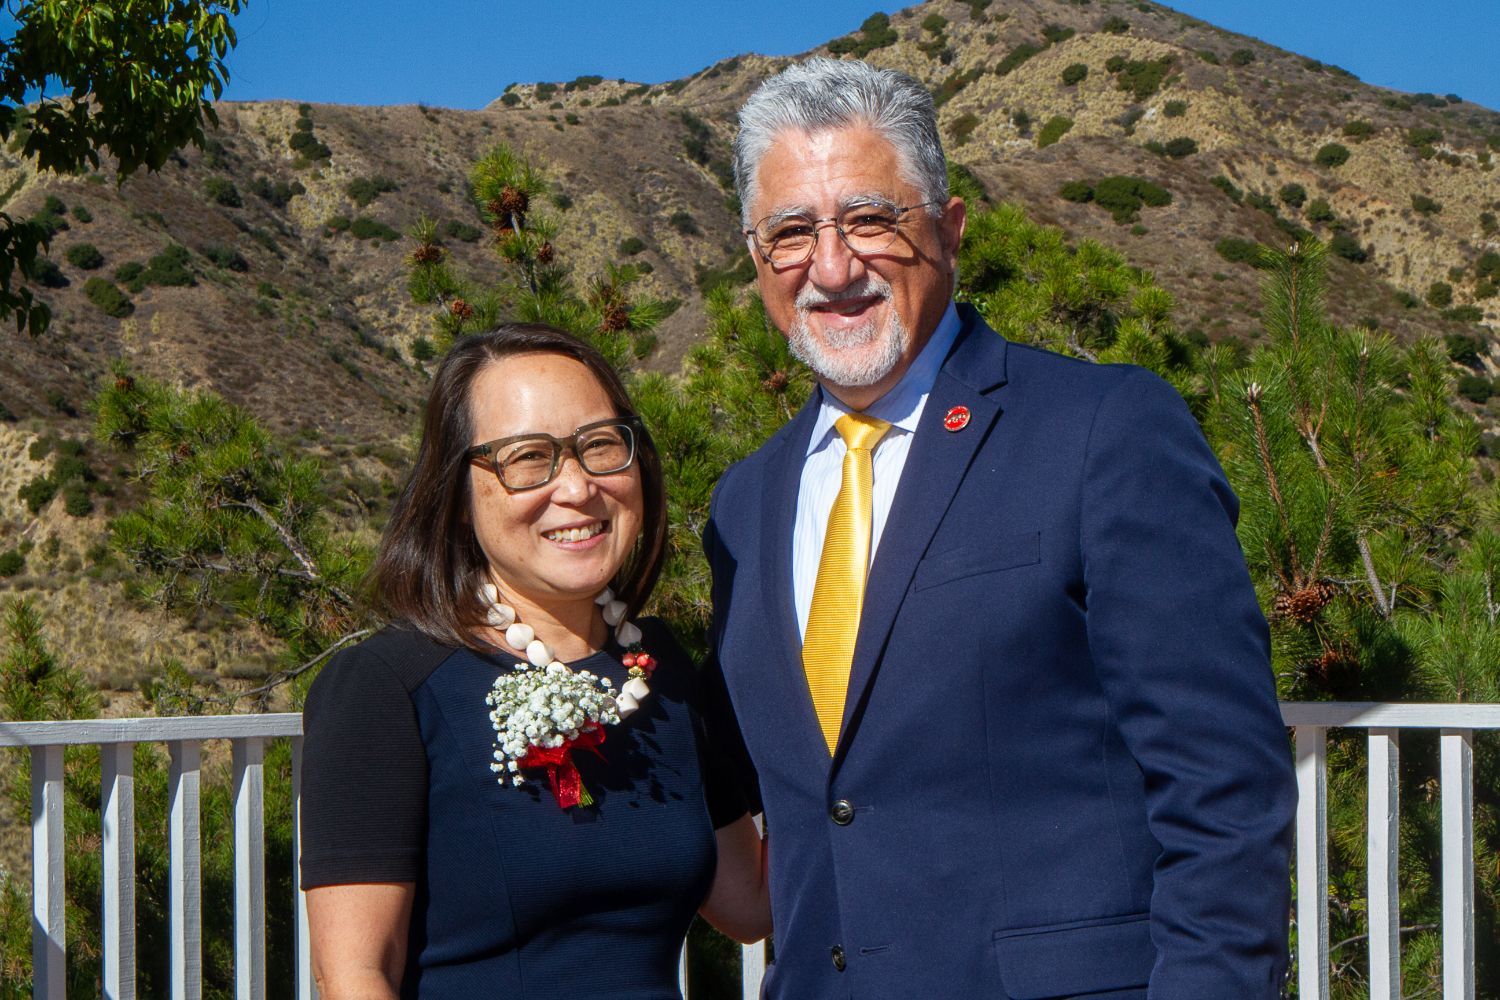 PHOTO: David Lohr | The South Pasadenan | Leslie Ito was presented with Senator Anthony J. Portantino's Women in Business award in the arts category.